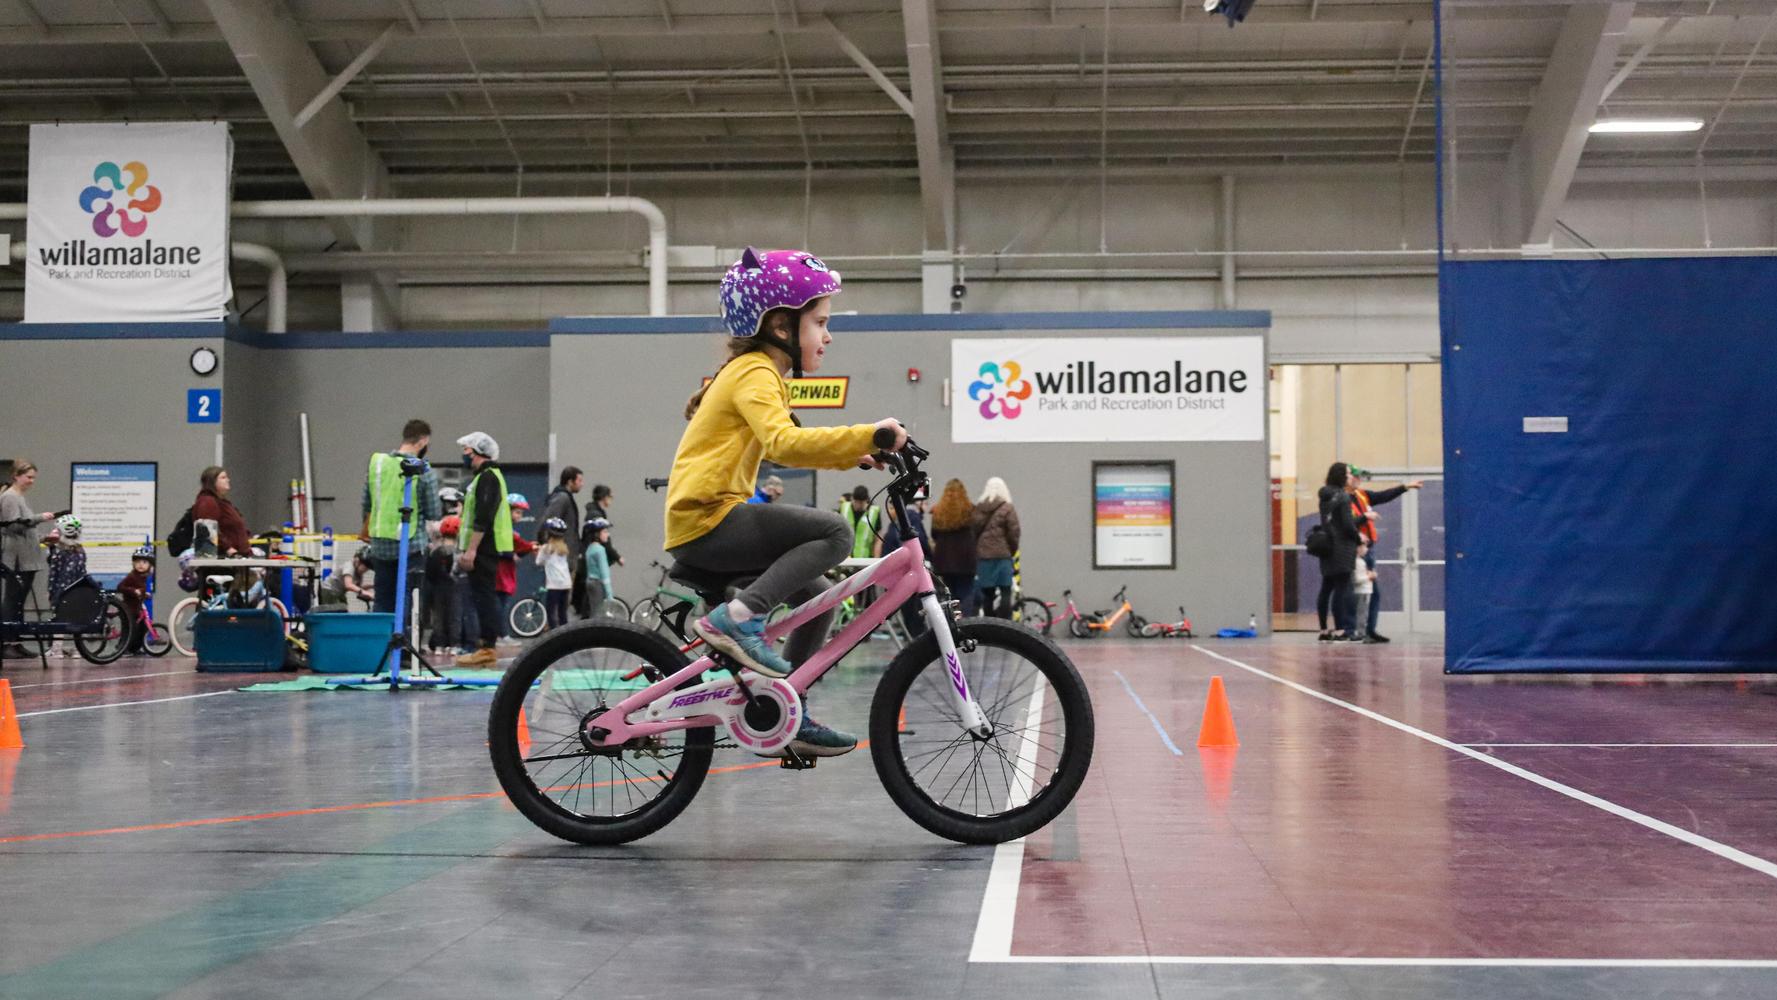 Child learns to ride a bike indoors at community event